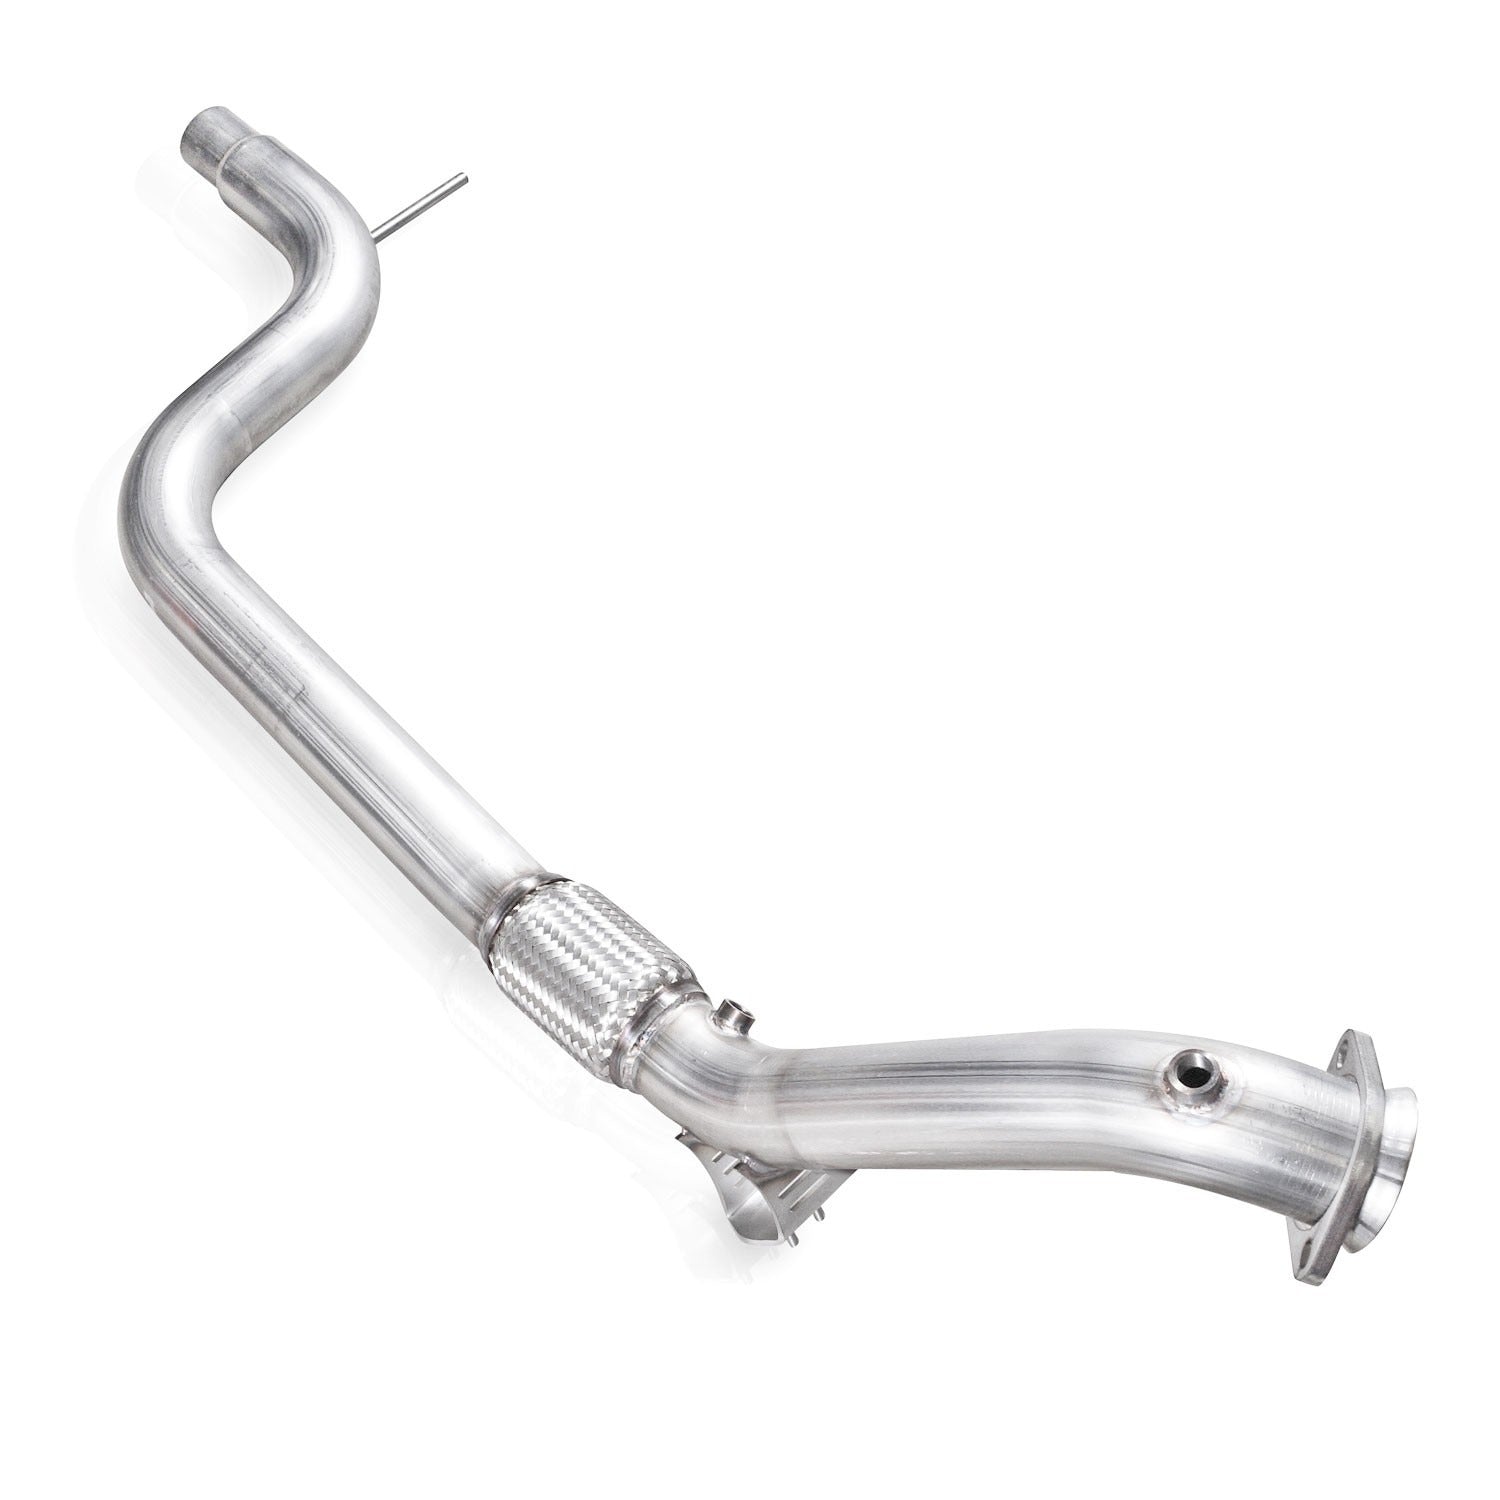 STAINLESS WORKS Mustang EcoBoost 2015-2018 Downpipe Factory Connect - Stainless (2015-2018 2.3L Ecoboost ONLY)